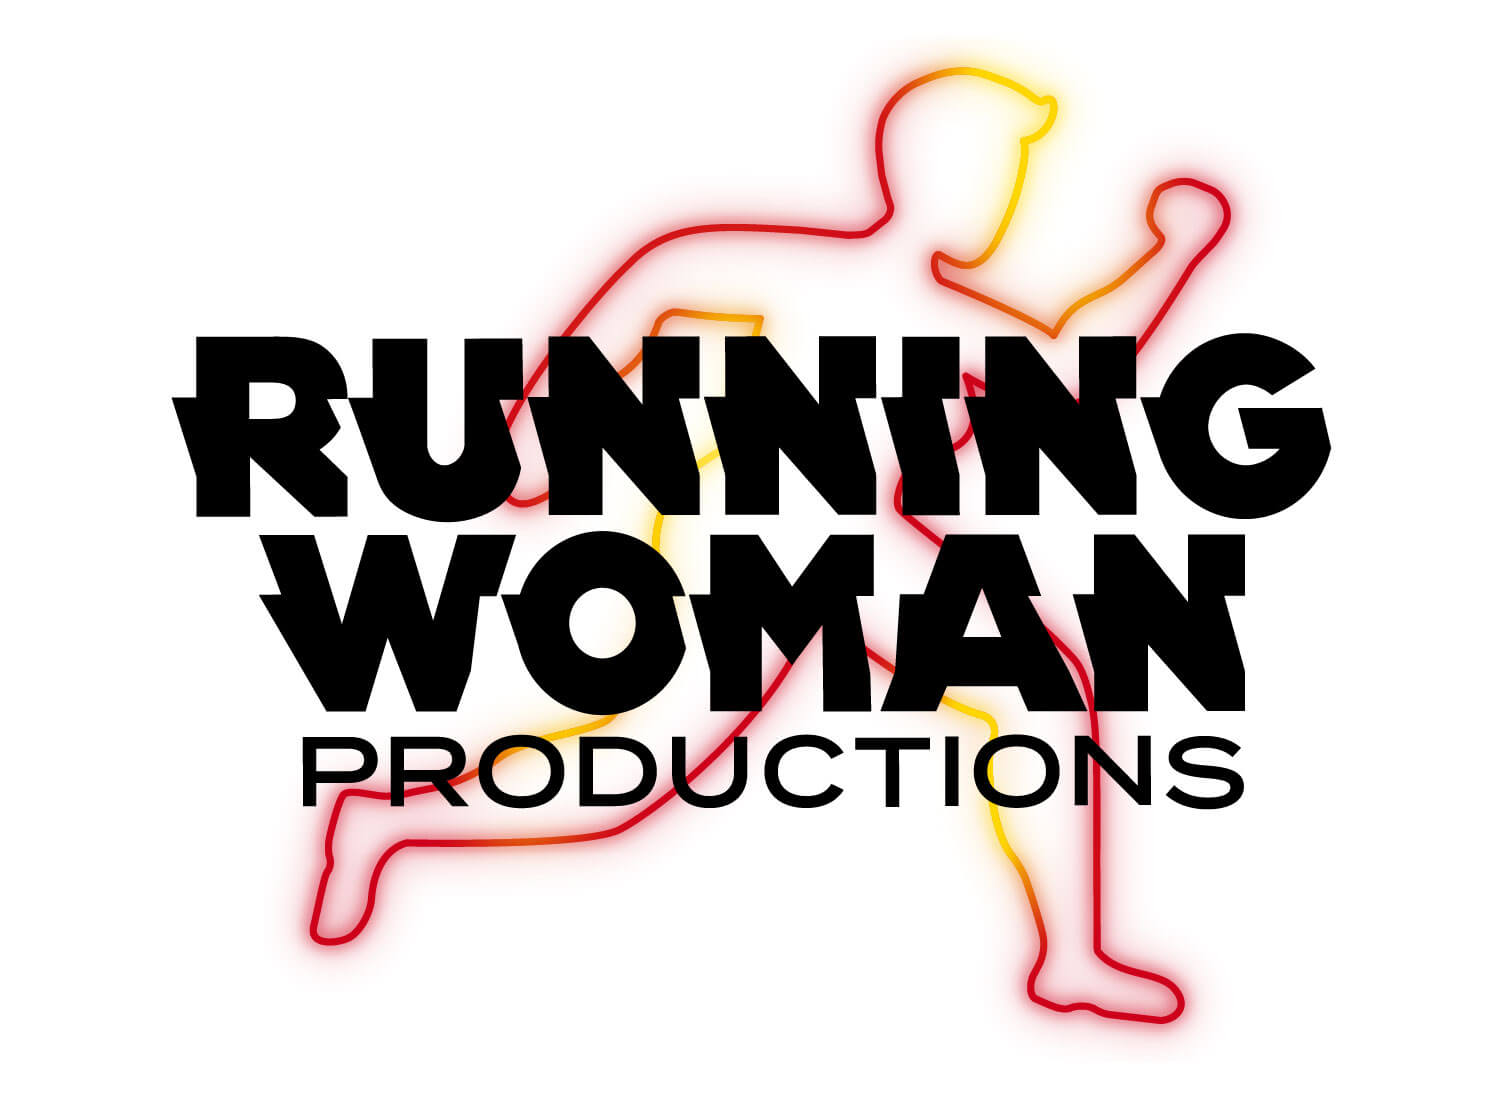 The Running Woman productions logo on a white background. The text is in black instead of white.